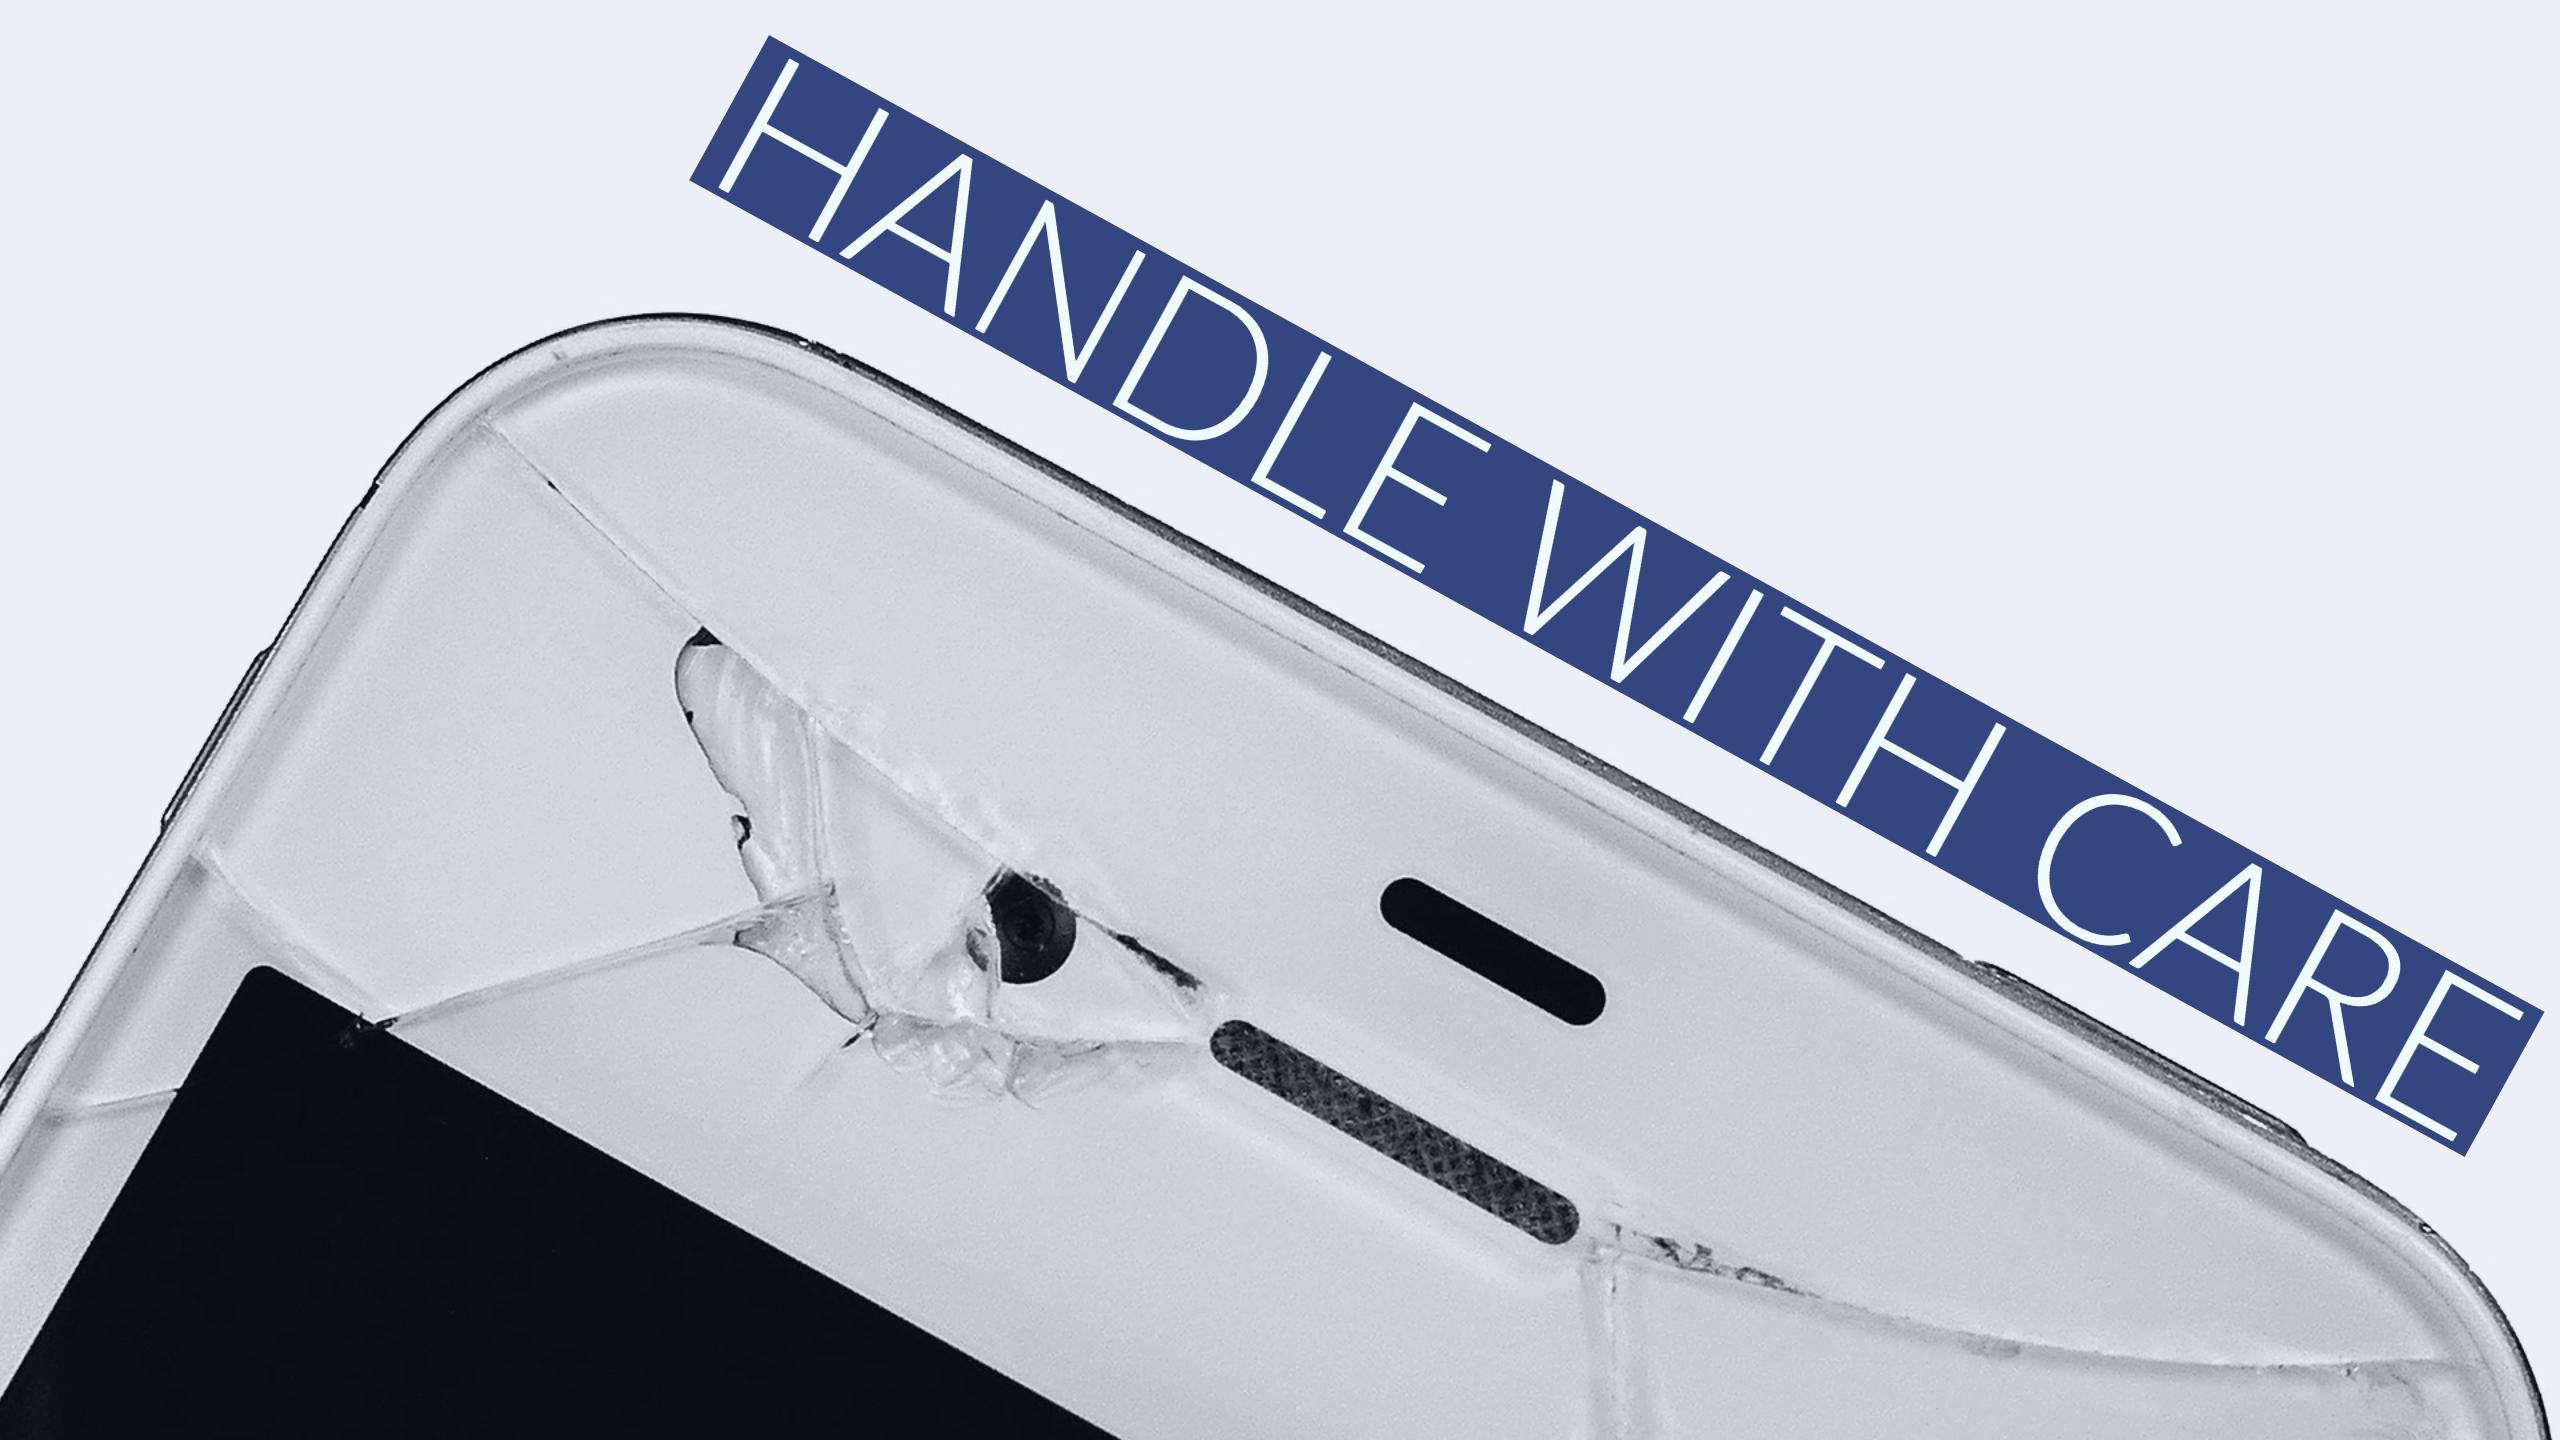 Handle devices with care